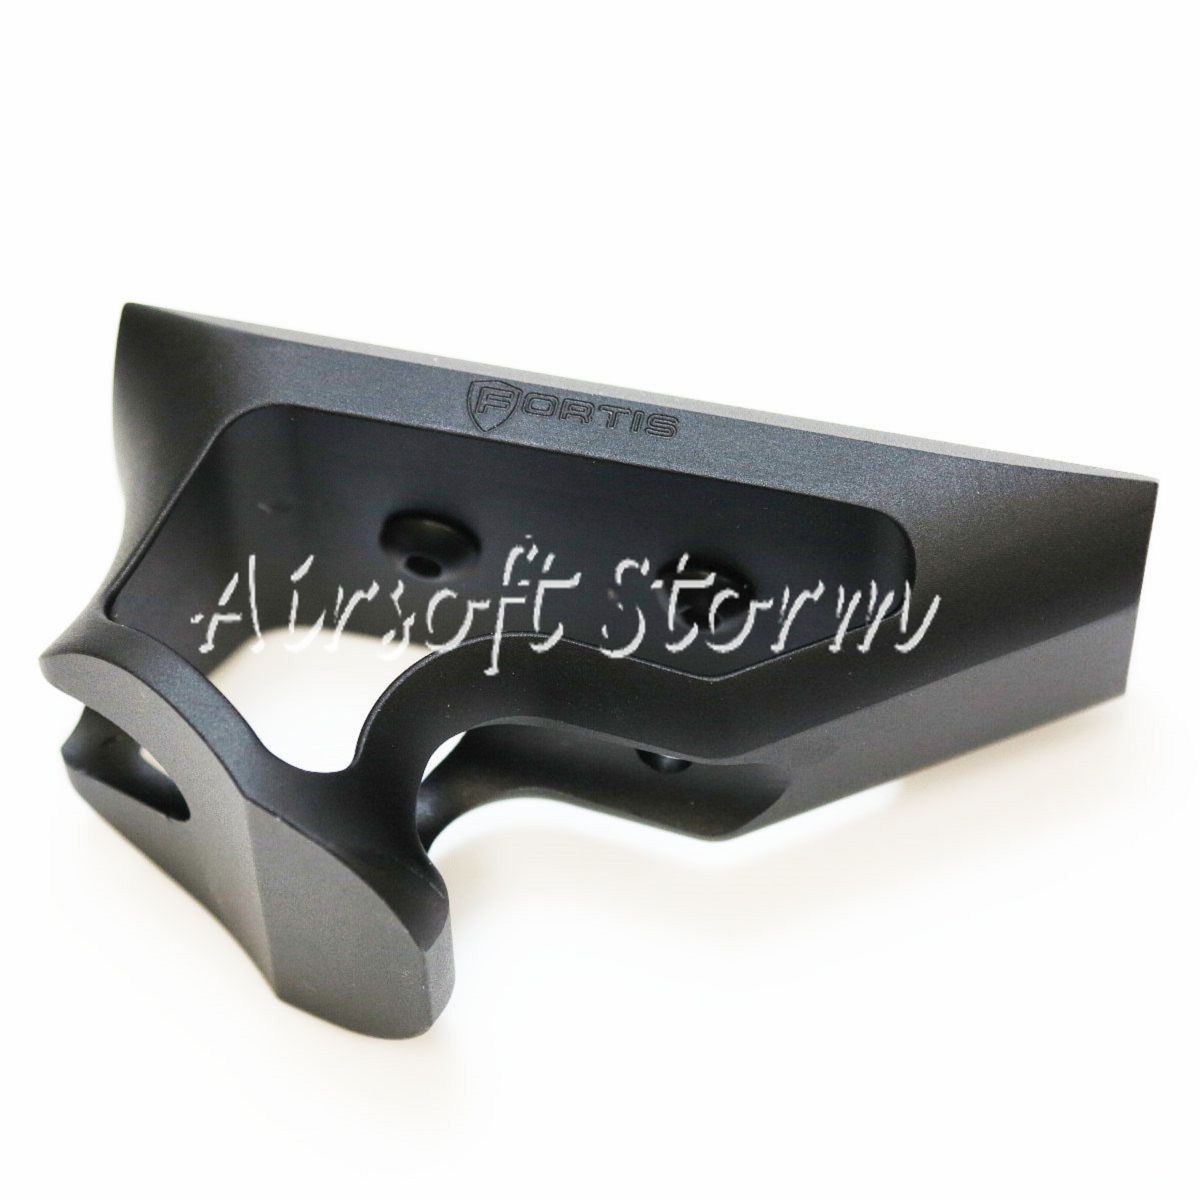 Airsoft Tactical Gear PTS Fortis Shift Short Angle Grip Keymod Version Black